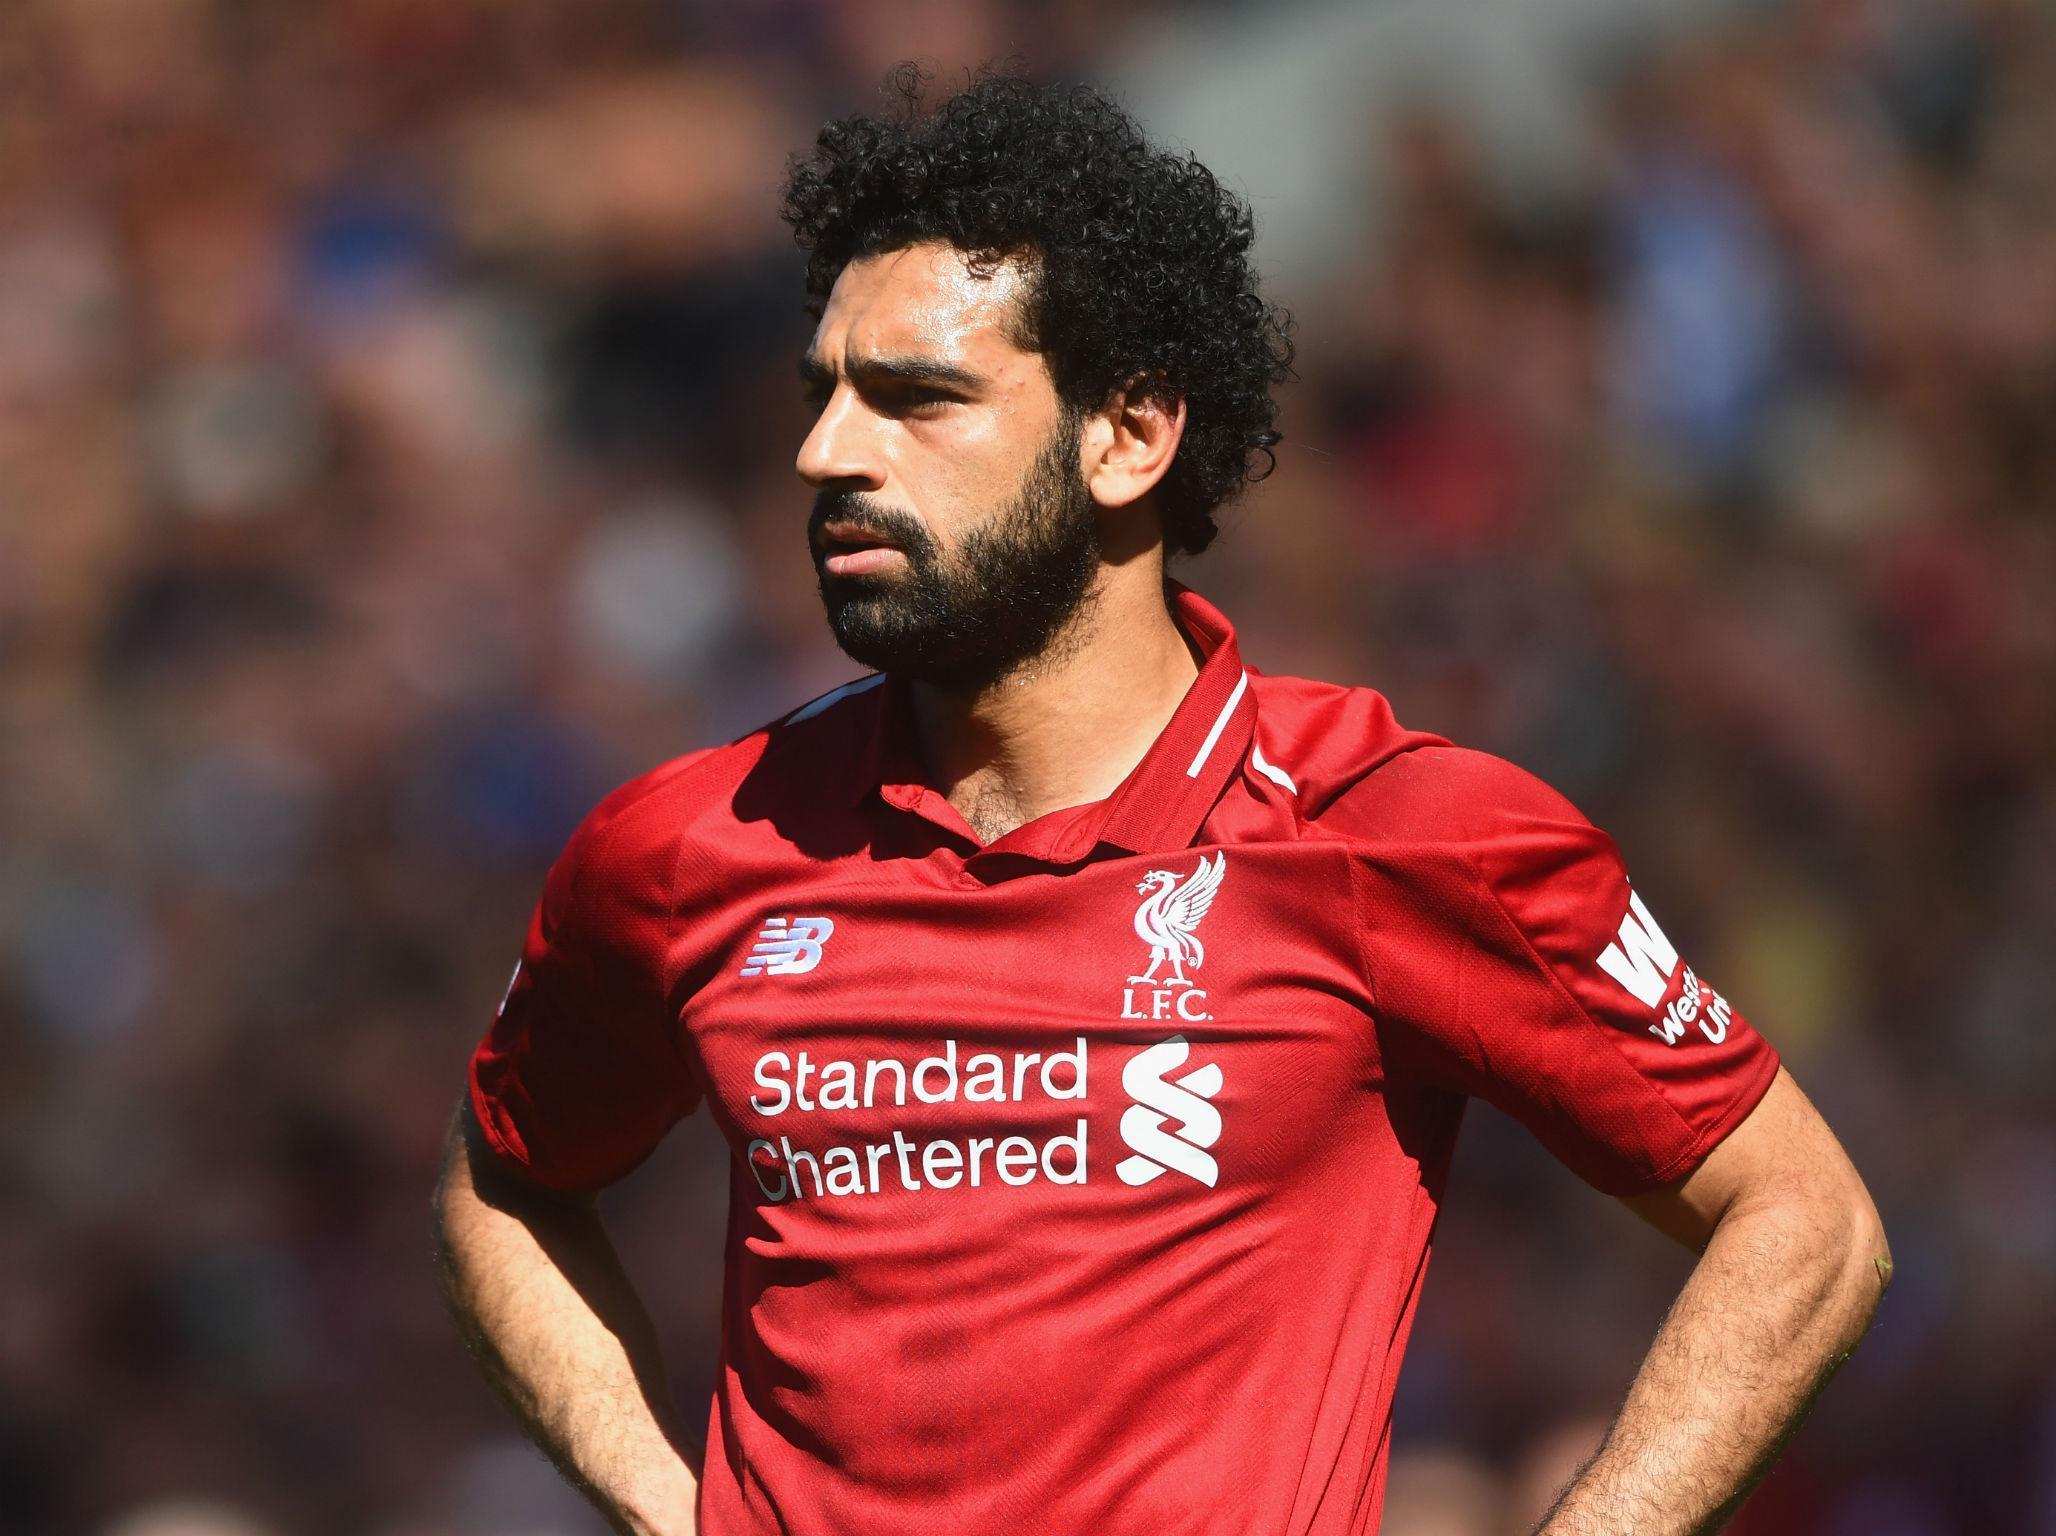 Earlier this week, the Egyptian Football Federation announced it does not expect Salah to be sidelined for more than three weeks